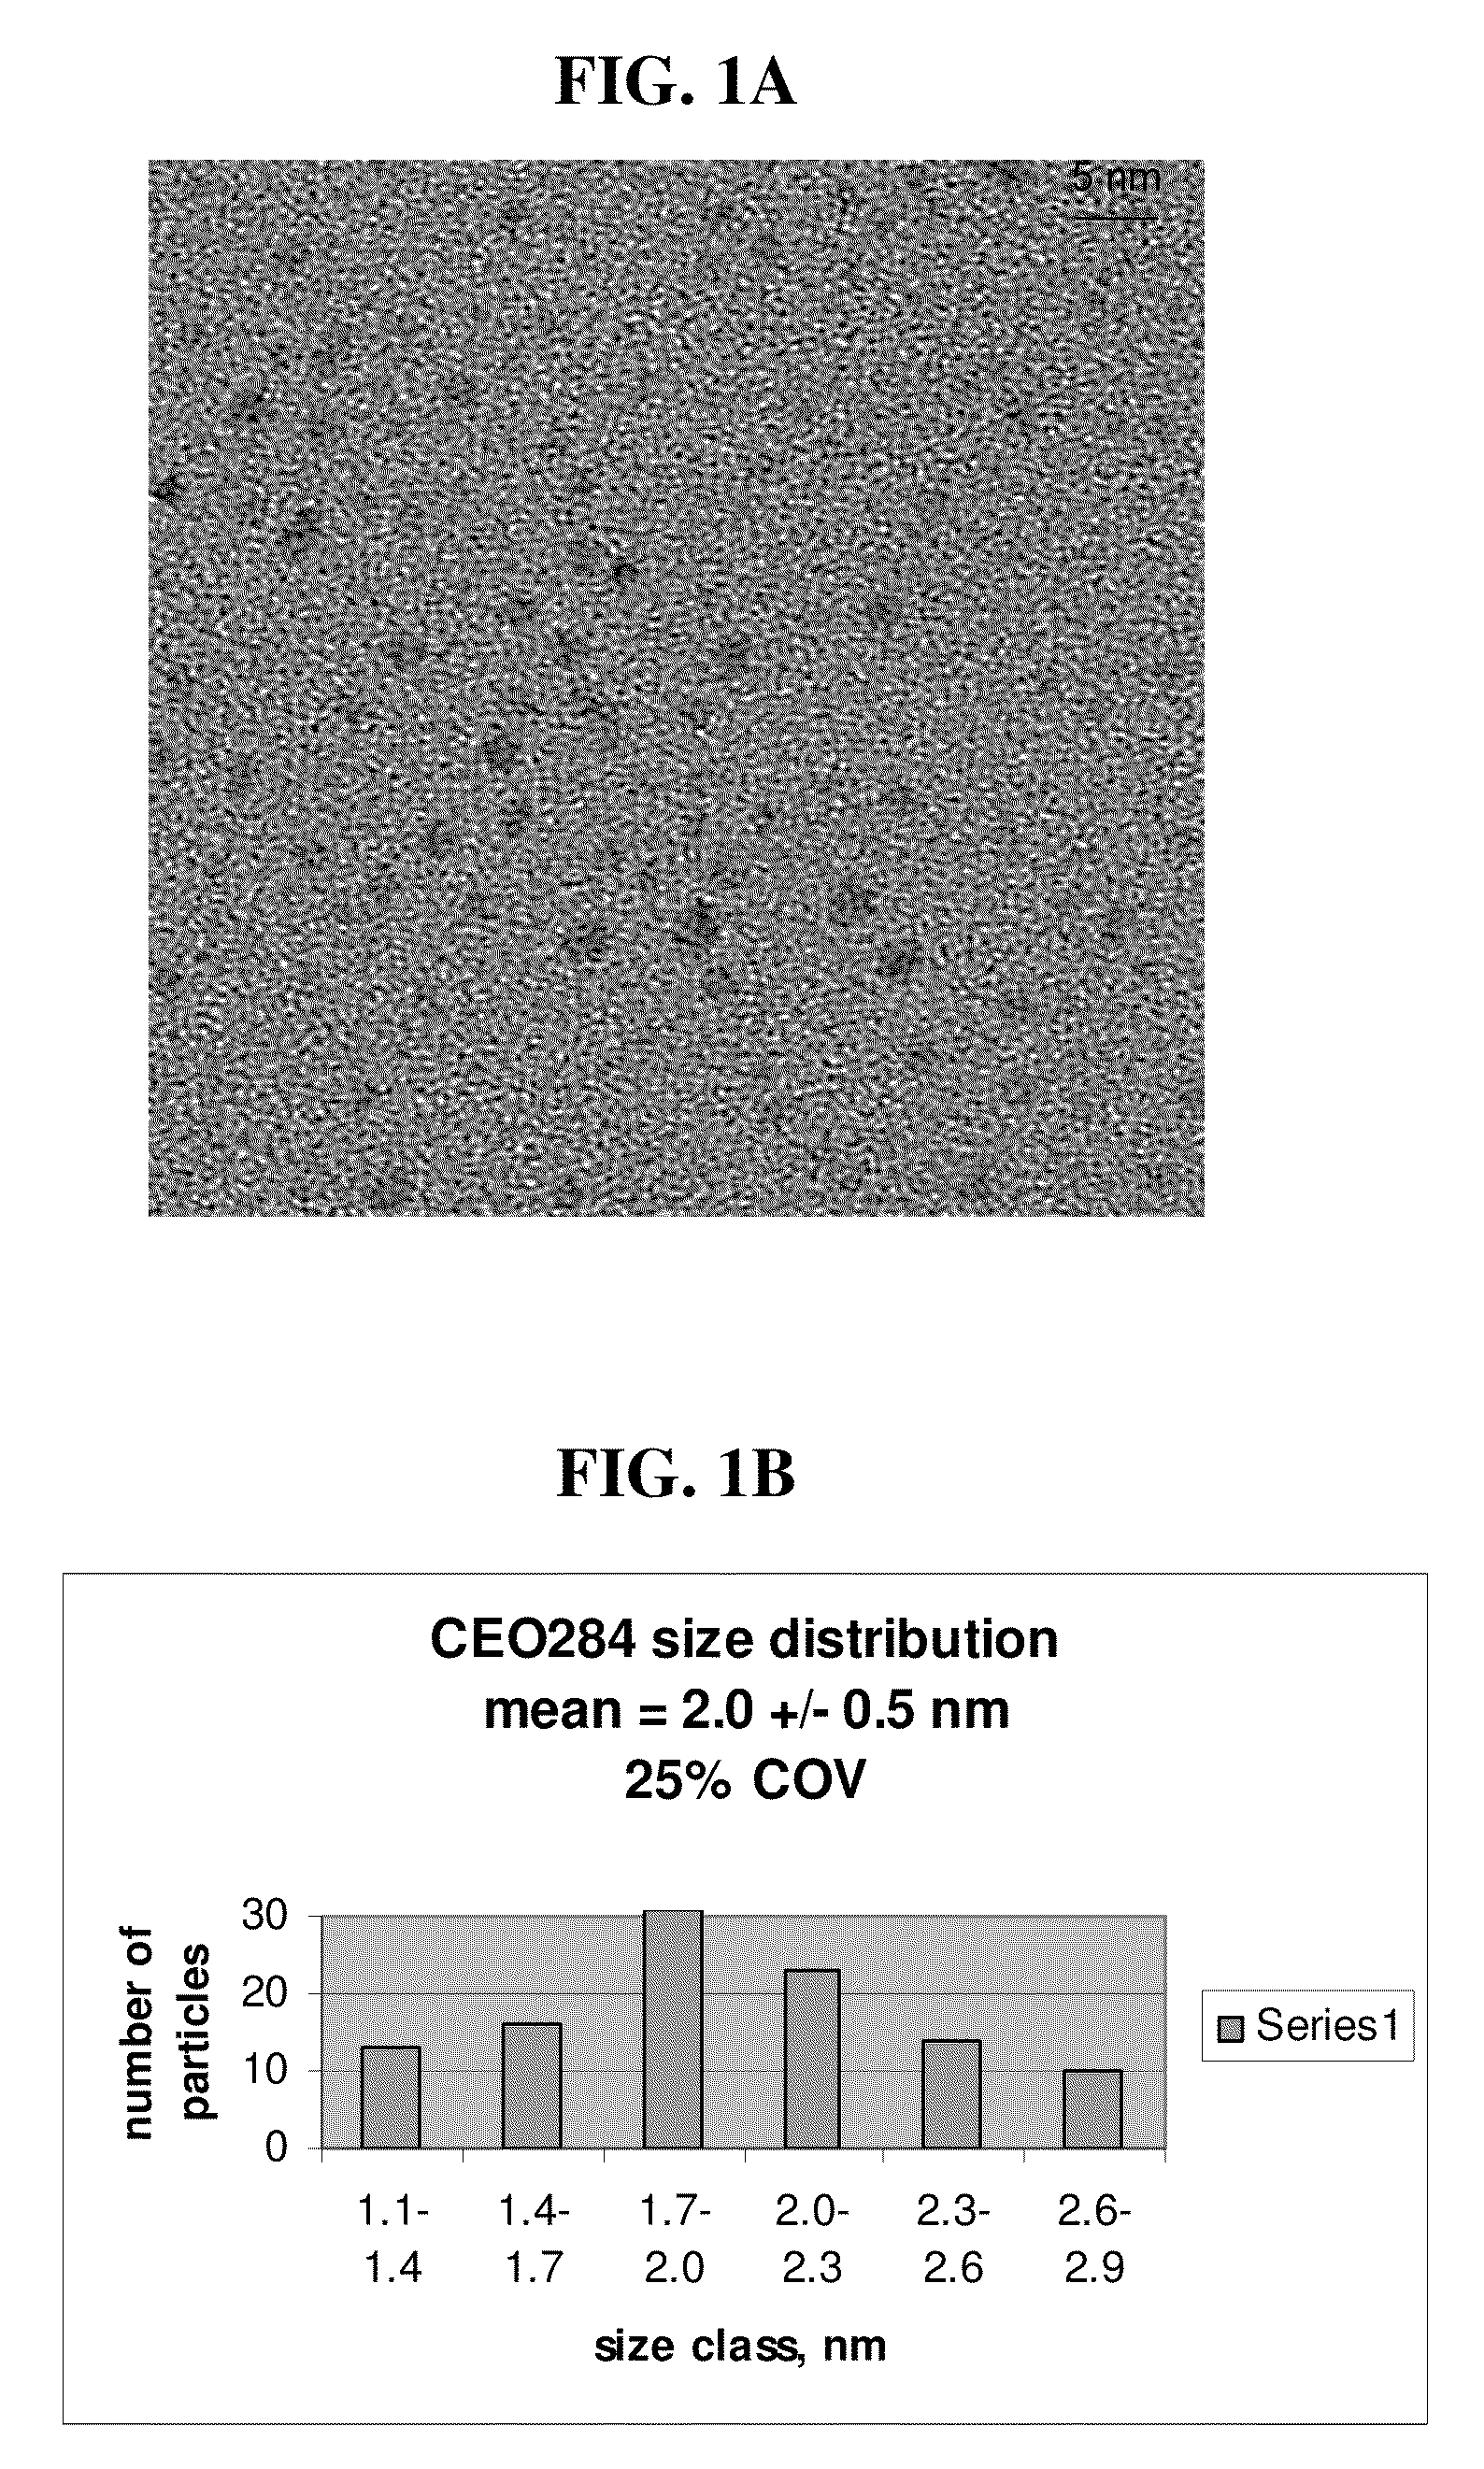 Process for Solvent Shifting a Nanoparticle Dispersion